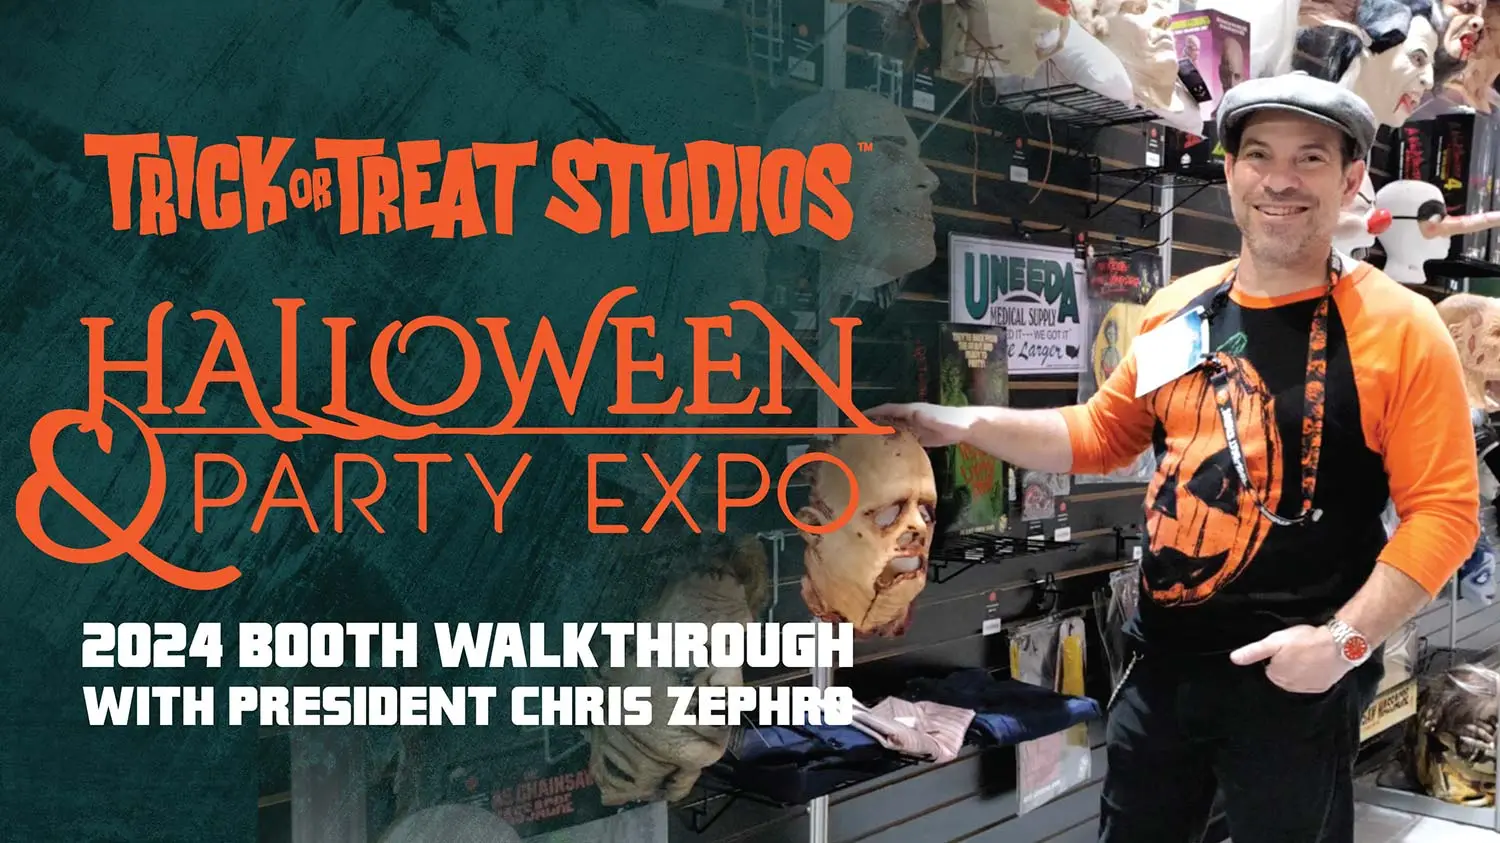 Trick or Treat Studios Booth at the 2024 Halloween & Party Expo in Las Vegas with President Chris Zephro!